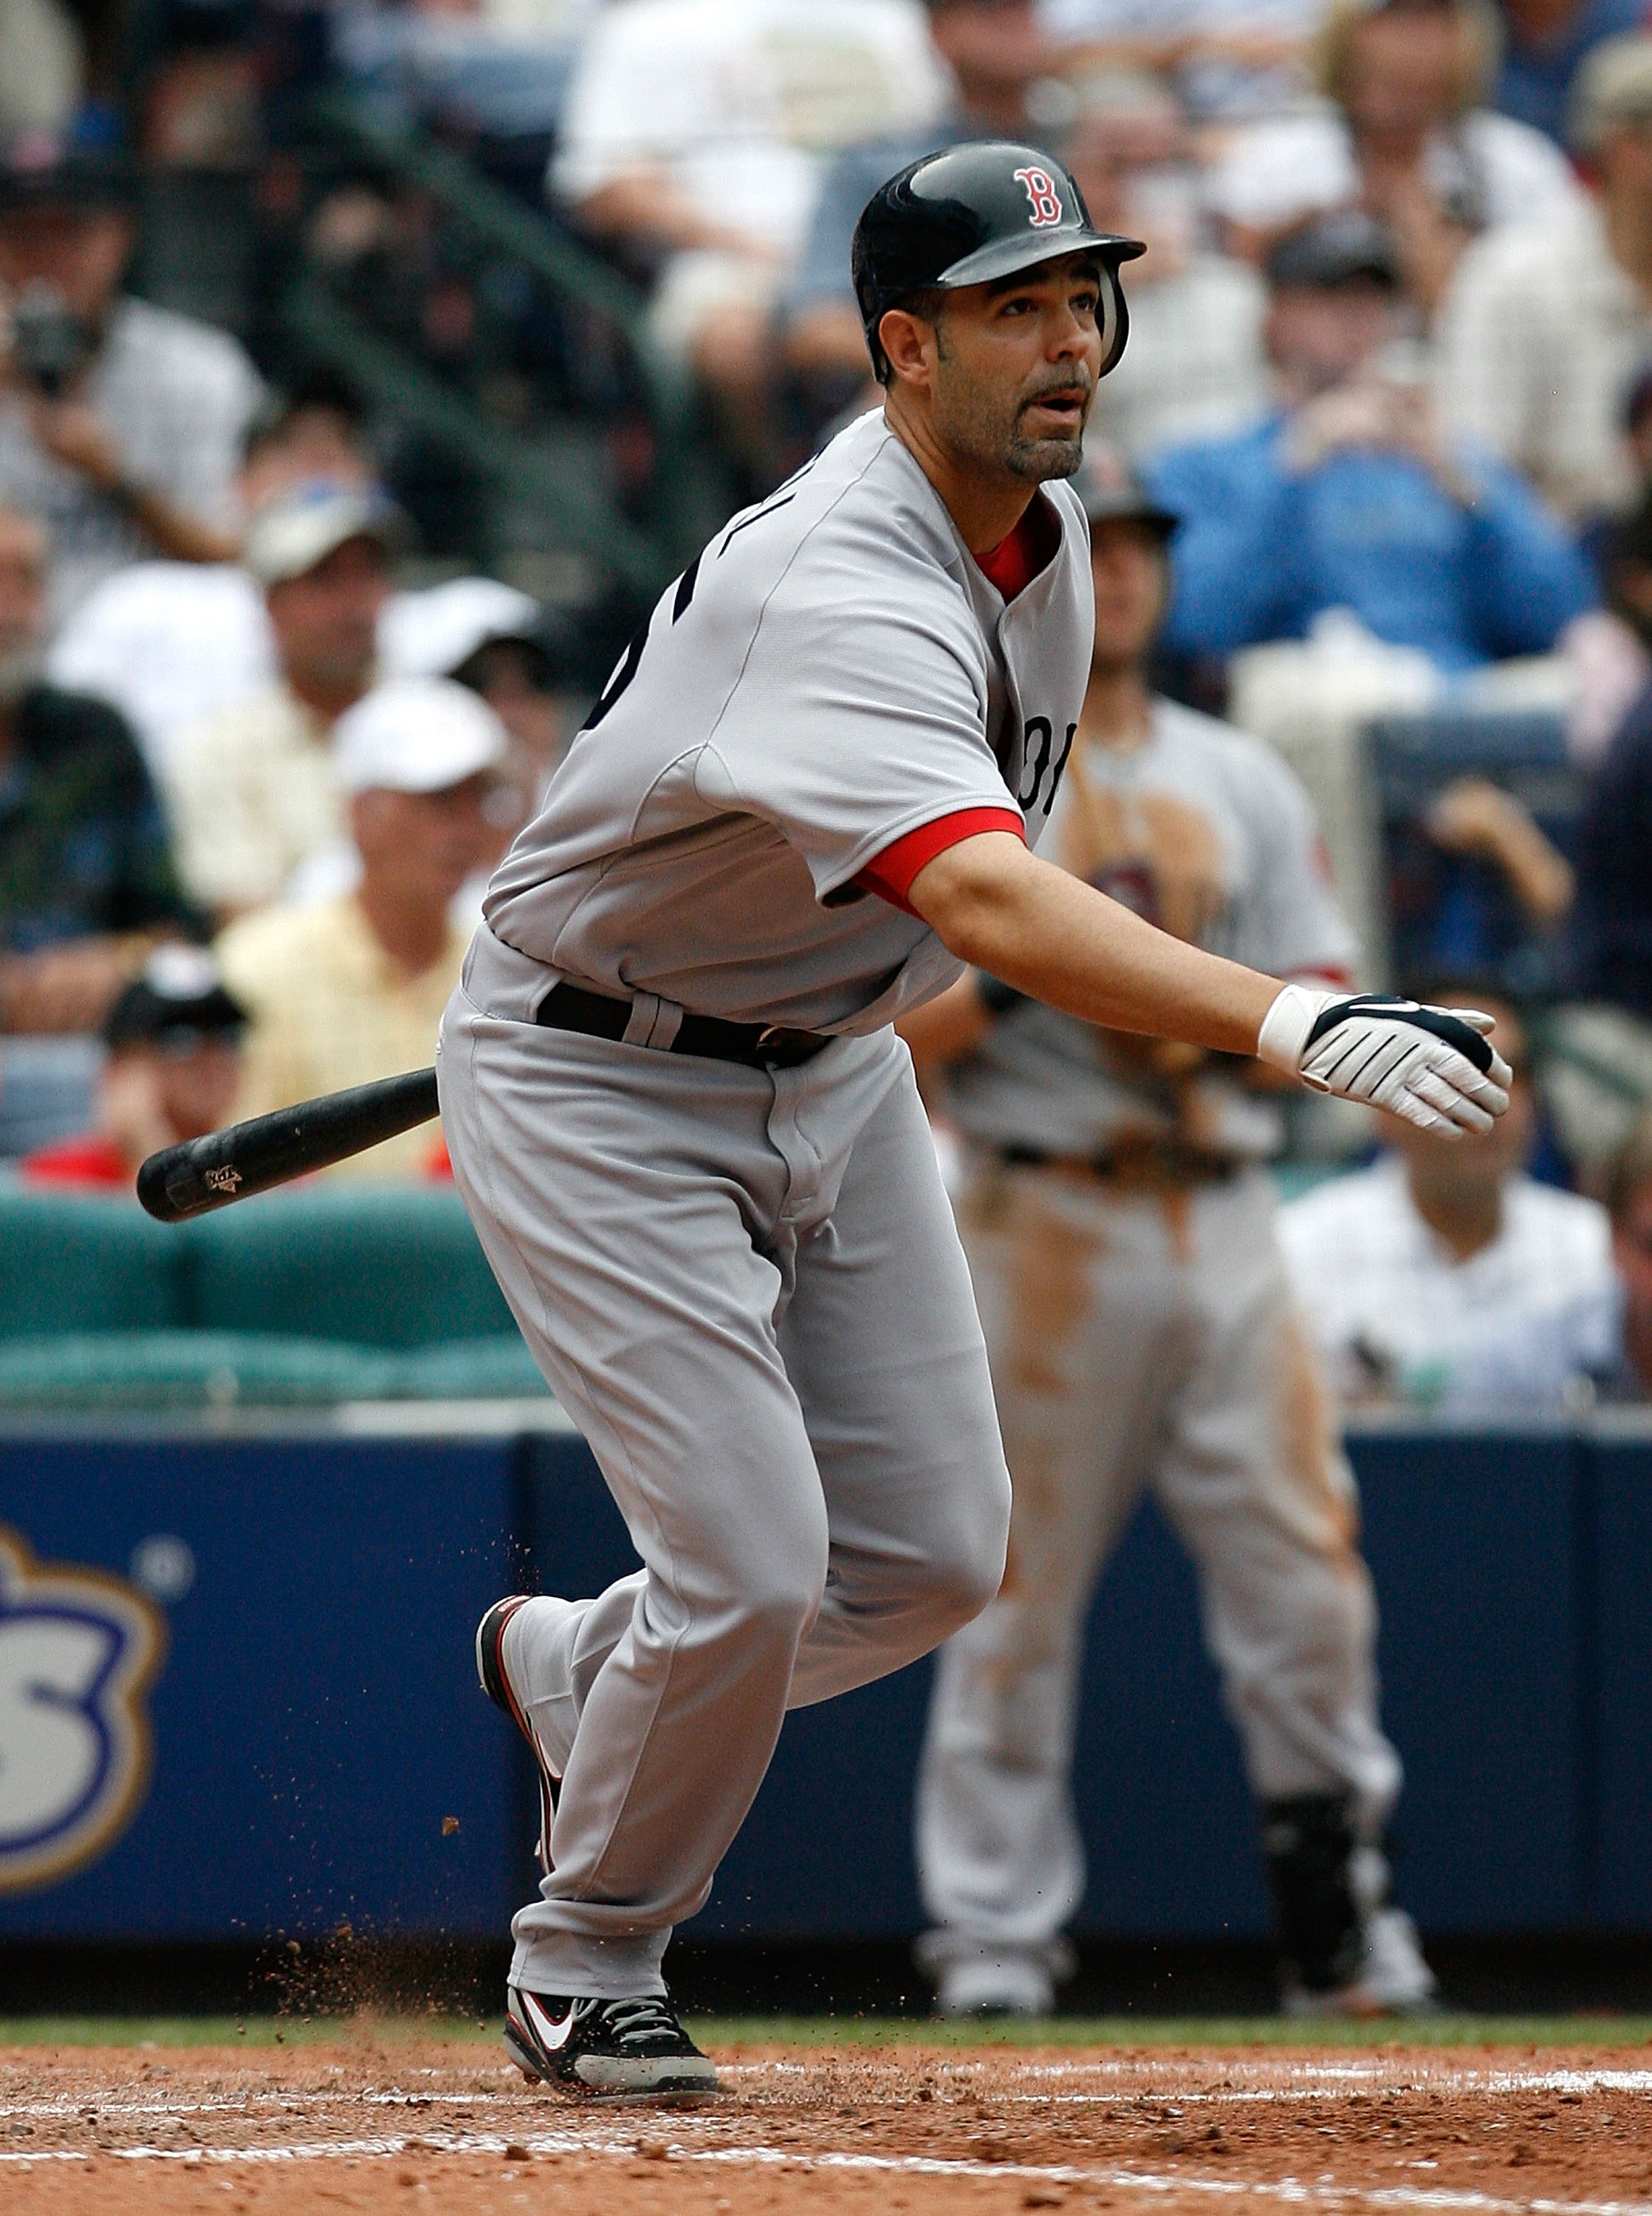 ATLANTA - JUNE 27:  Mike Lowell #25 of the Boston Red Sox against the Atlanta Braves at Turner Field on June 27, 2009 in Atlanta, Georgia.  (Photo by Kevin C. Cox/Getty Images)